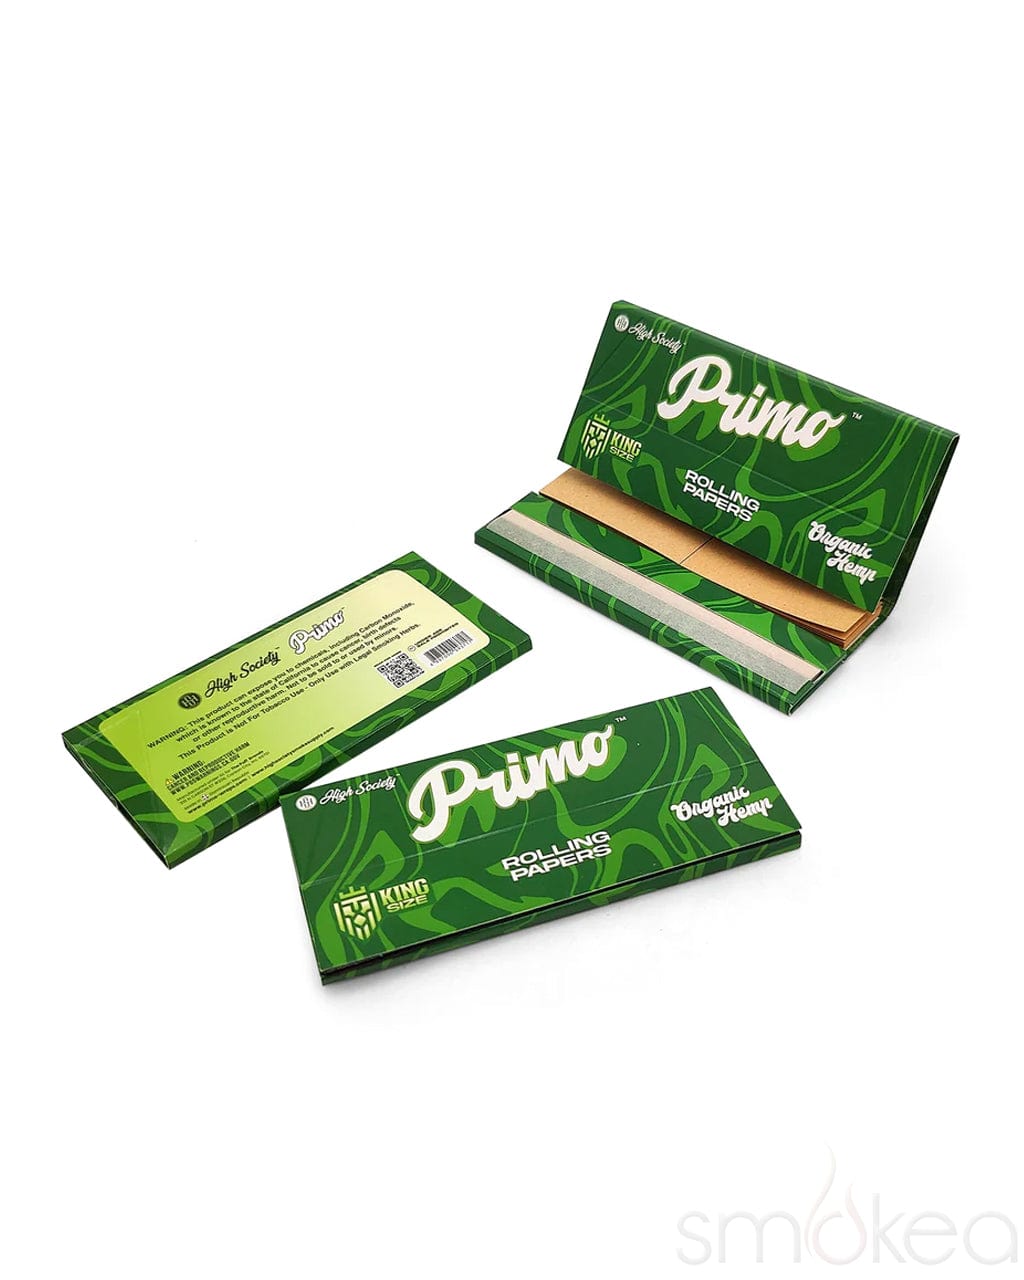 High Society Primo King Size Organic Hemp Papers w/ Tips